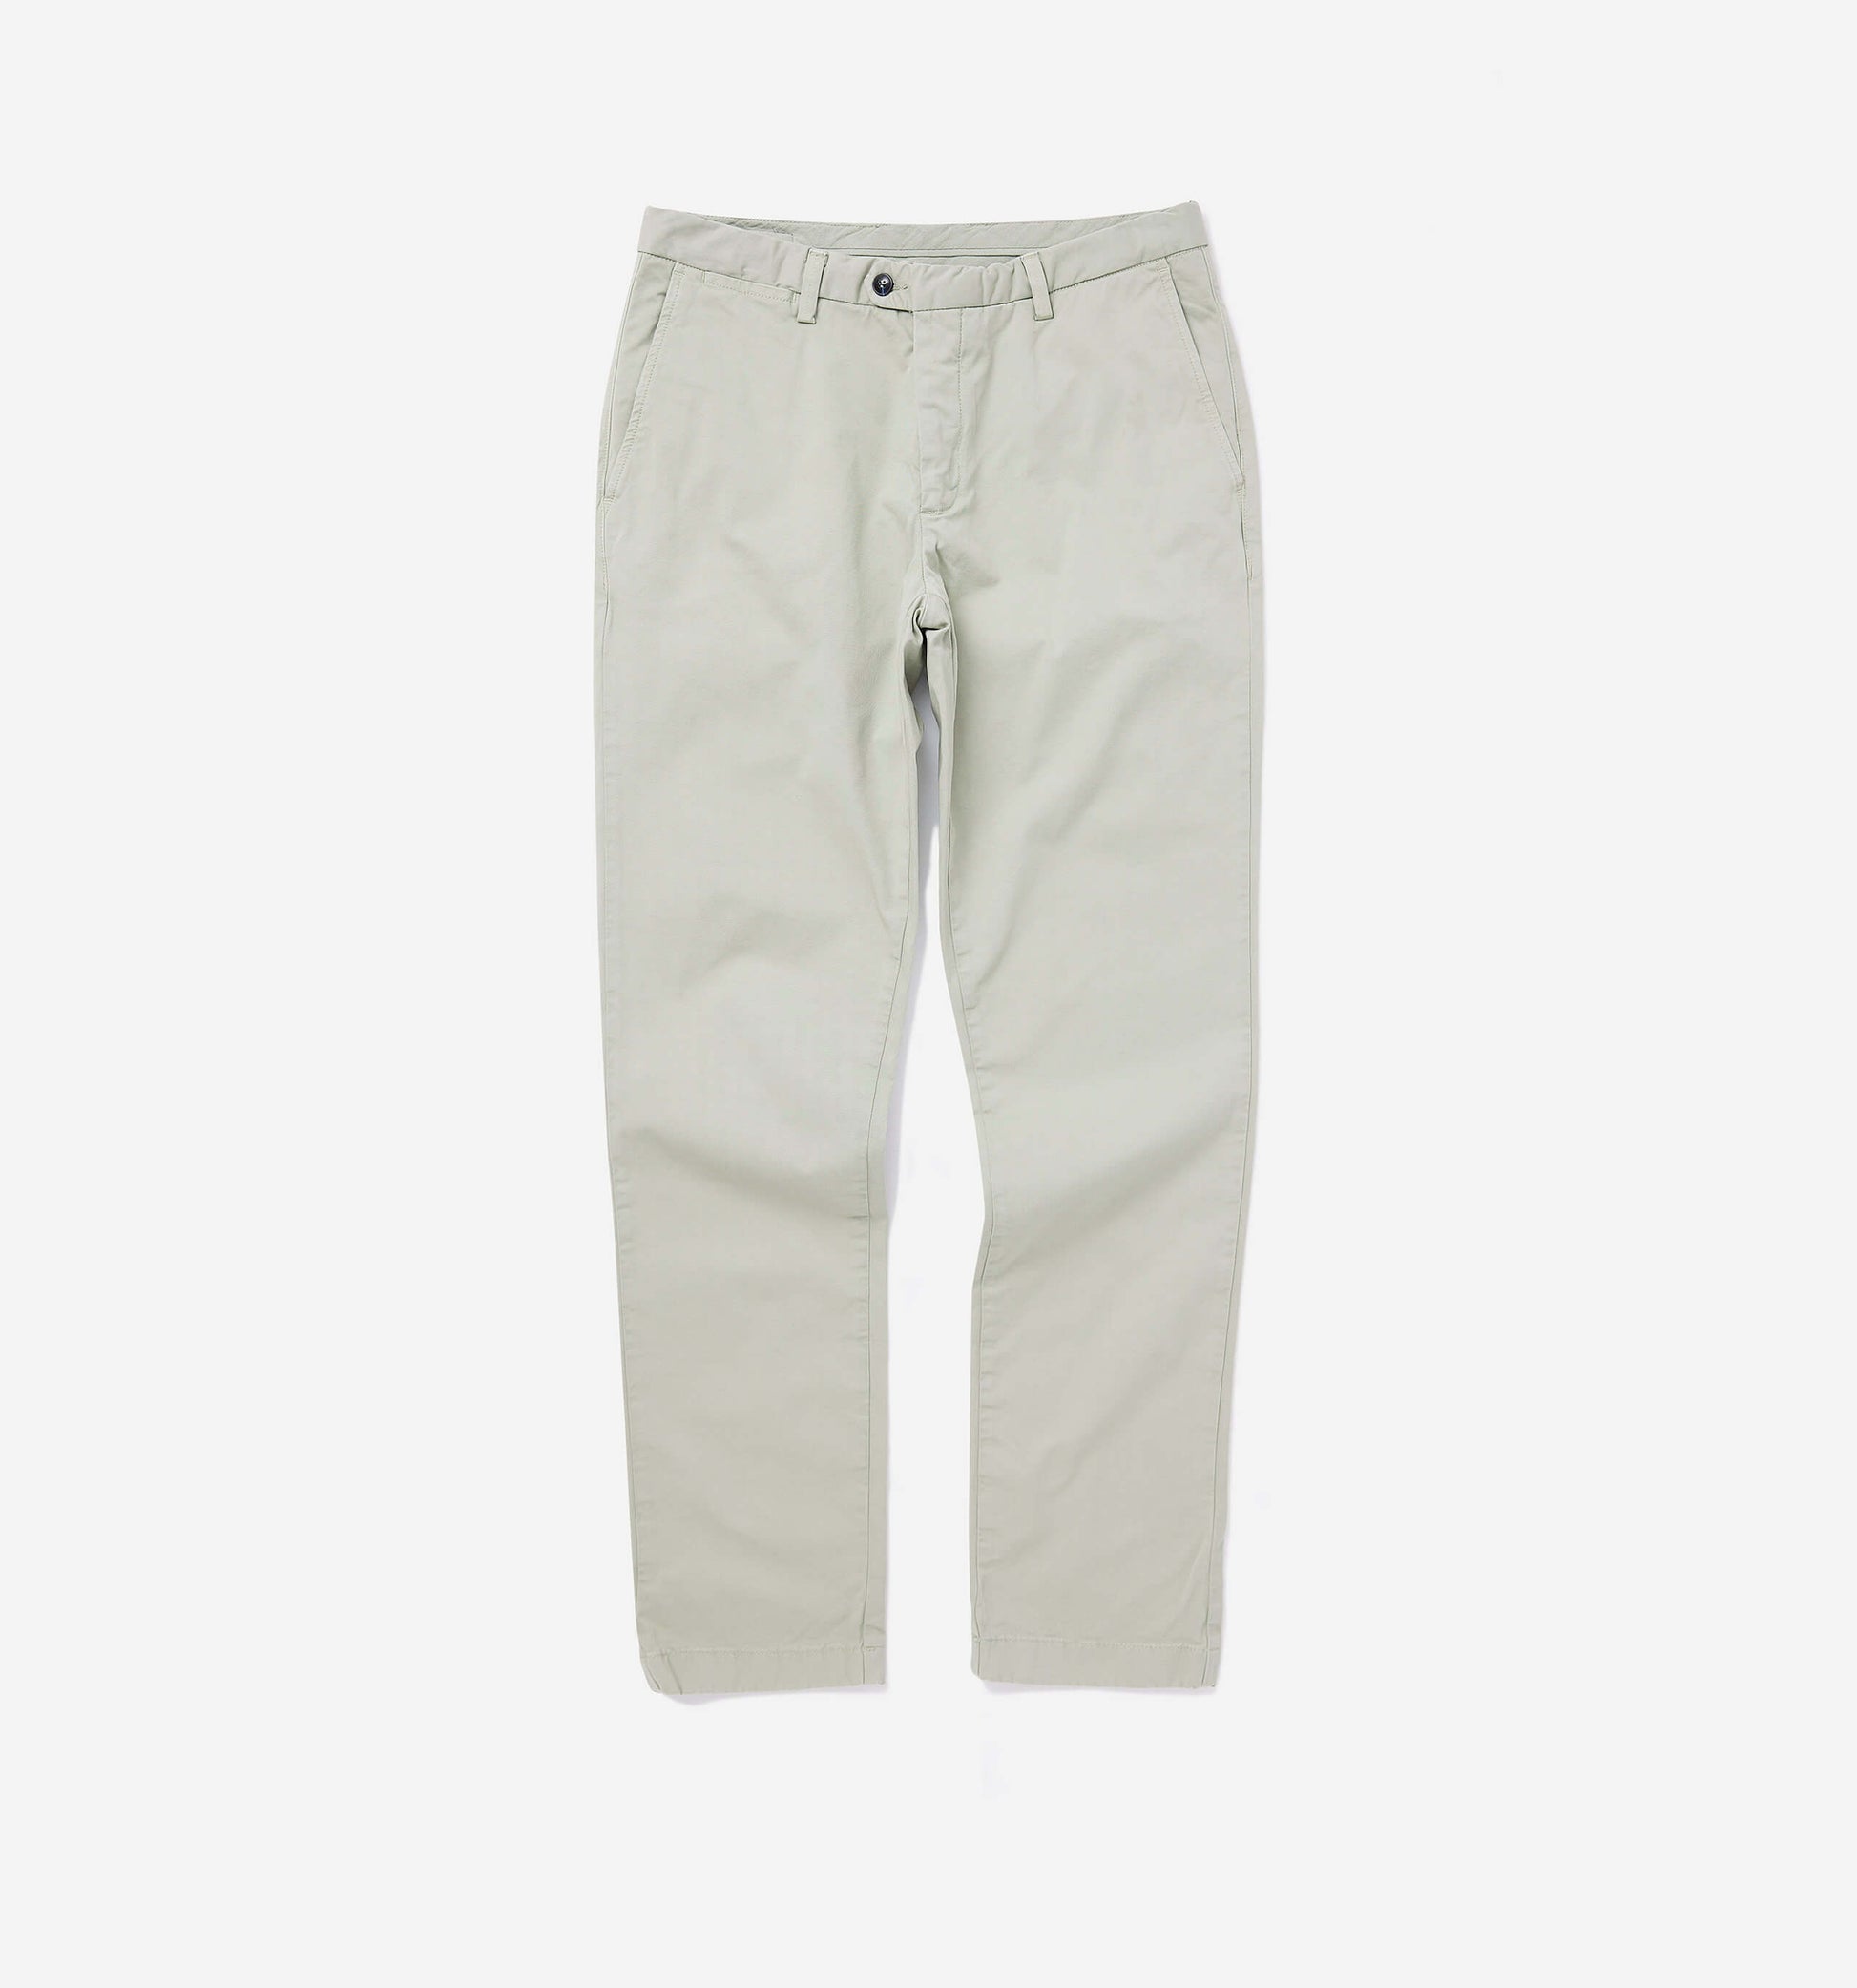 The Harry - Cotton-Stretch Chino In Sage From King Essentials